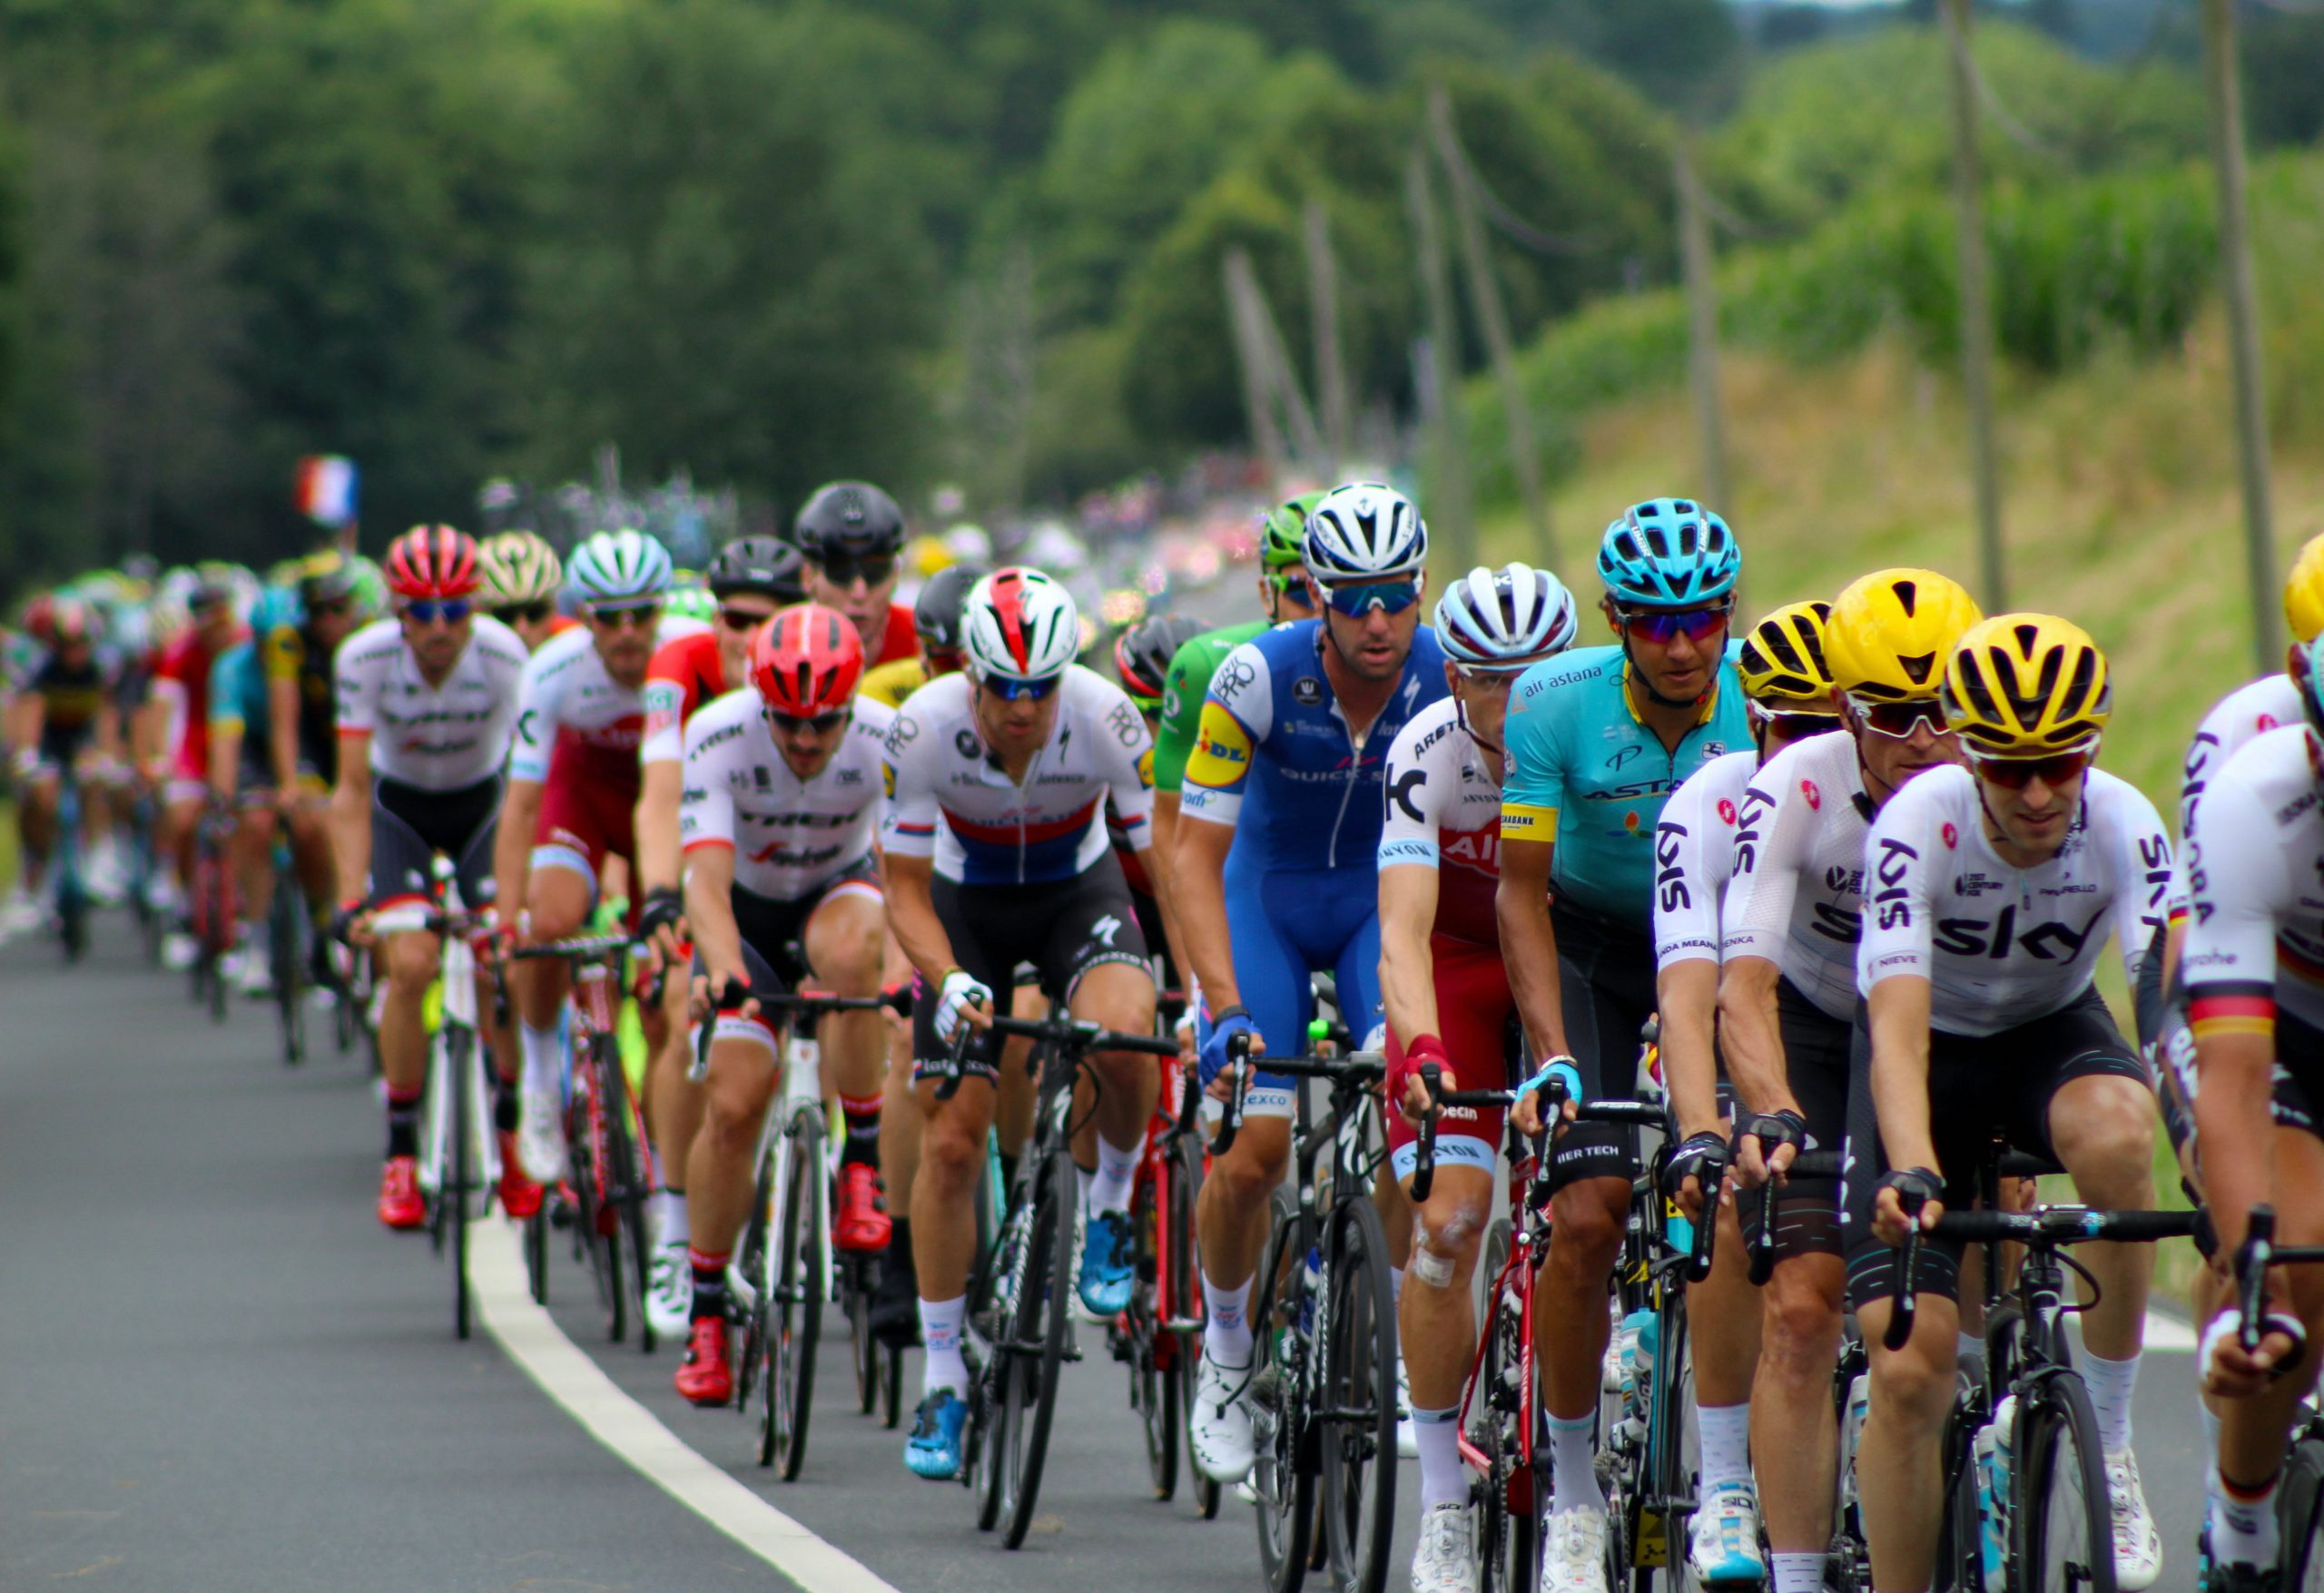 Tips for Watching the Tour de France in Paris